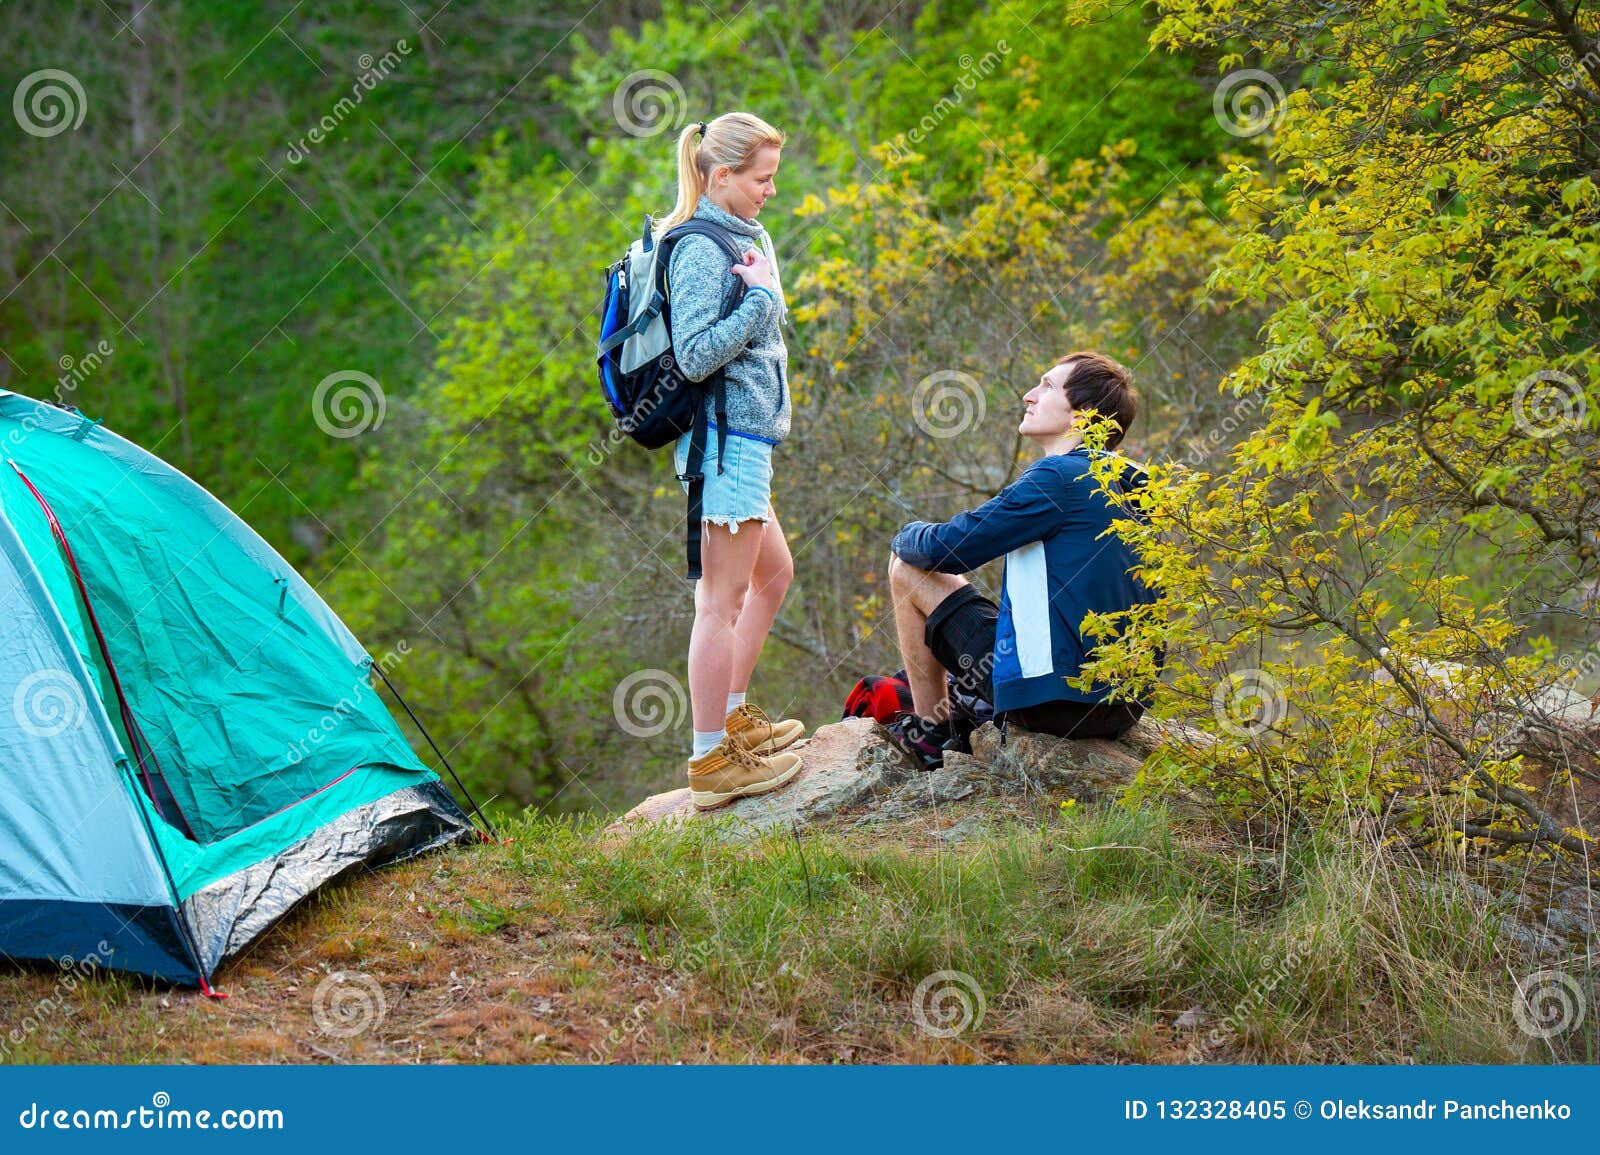 singles camping trips